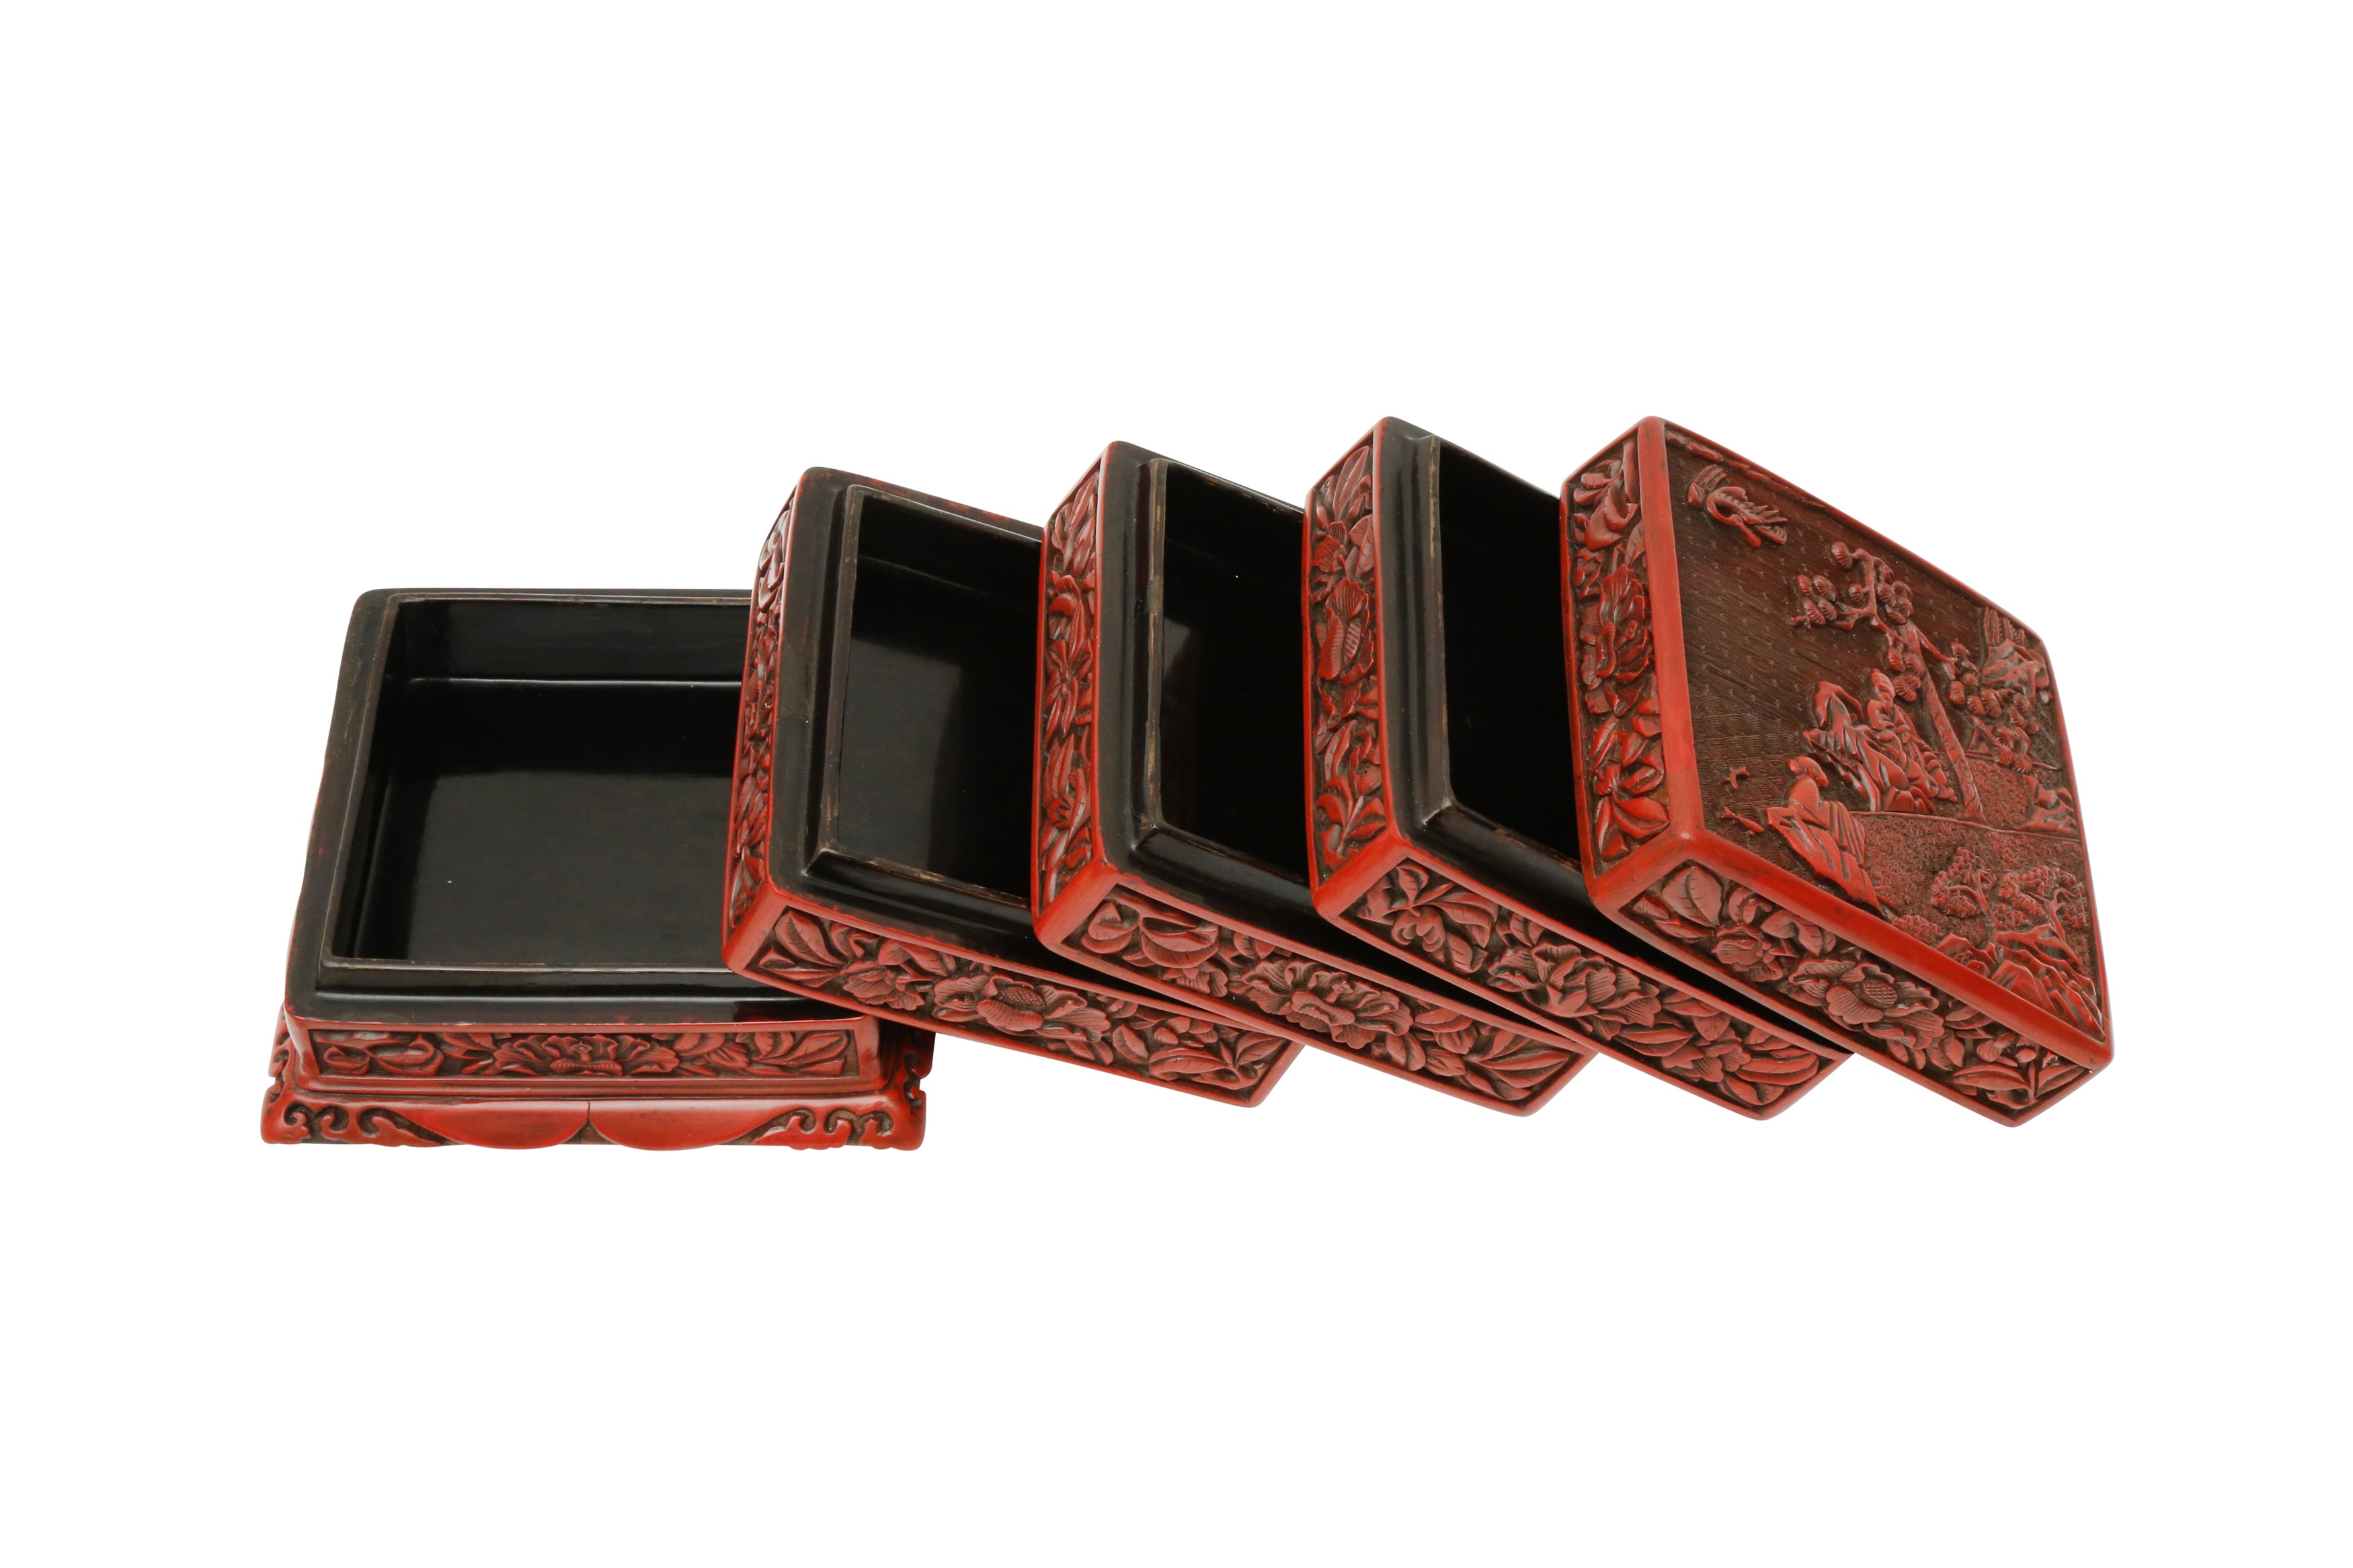 A CHINESE CINNABAR LACQUER TIERED BOX AND COVER 明 剔紅士大夫圖紋四層蓋盒 - Image 3 of 39